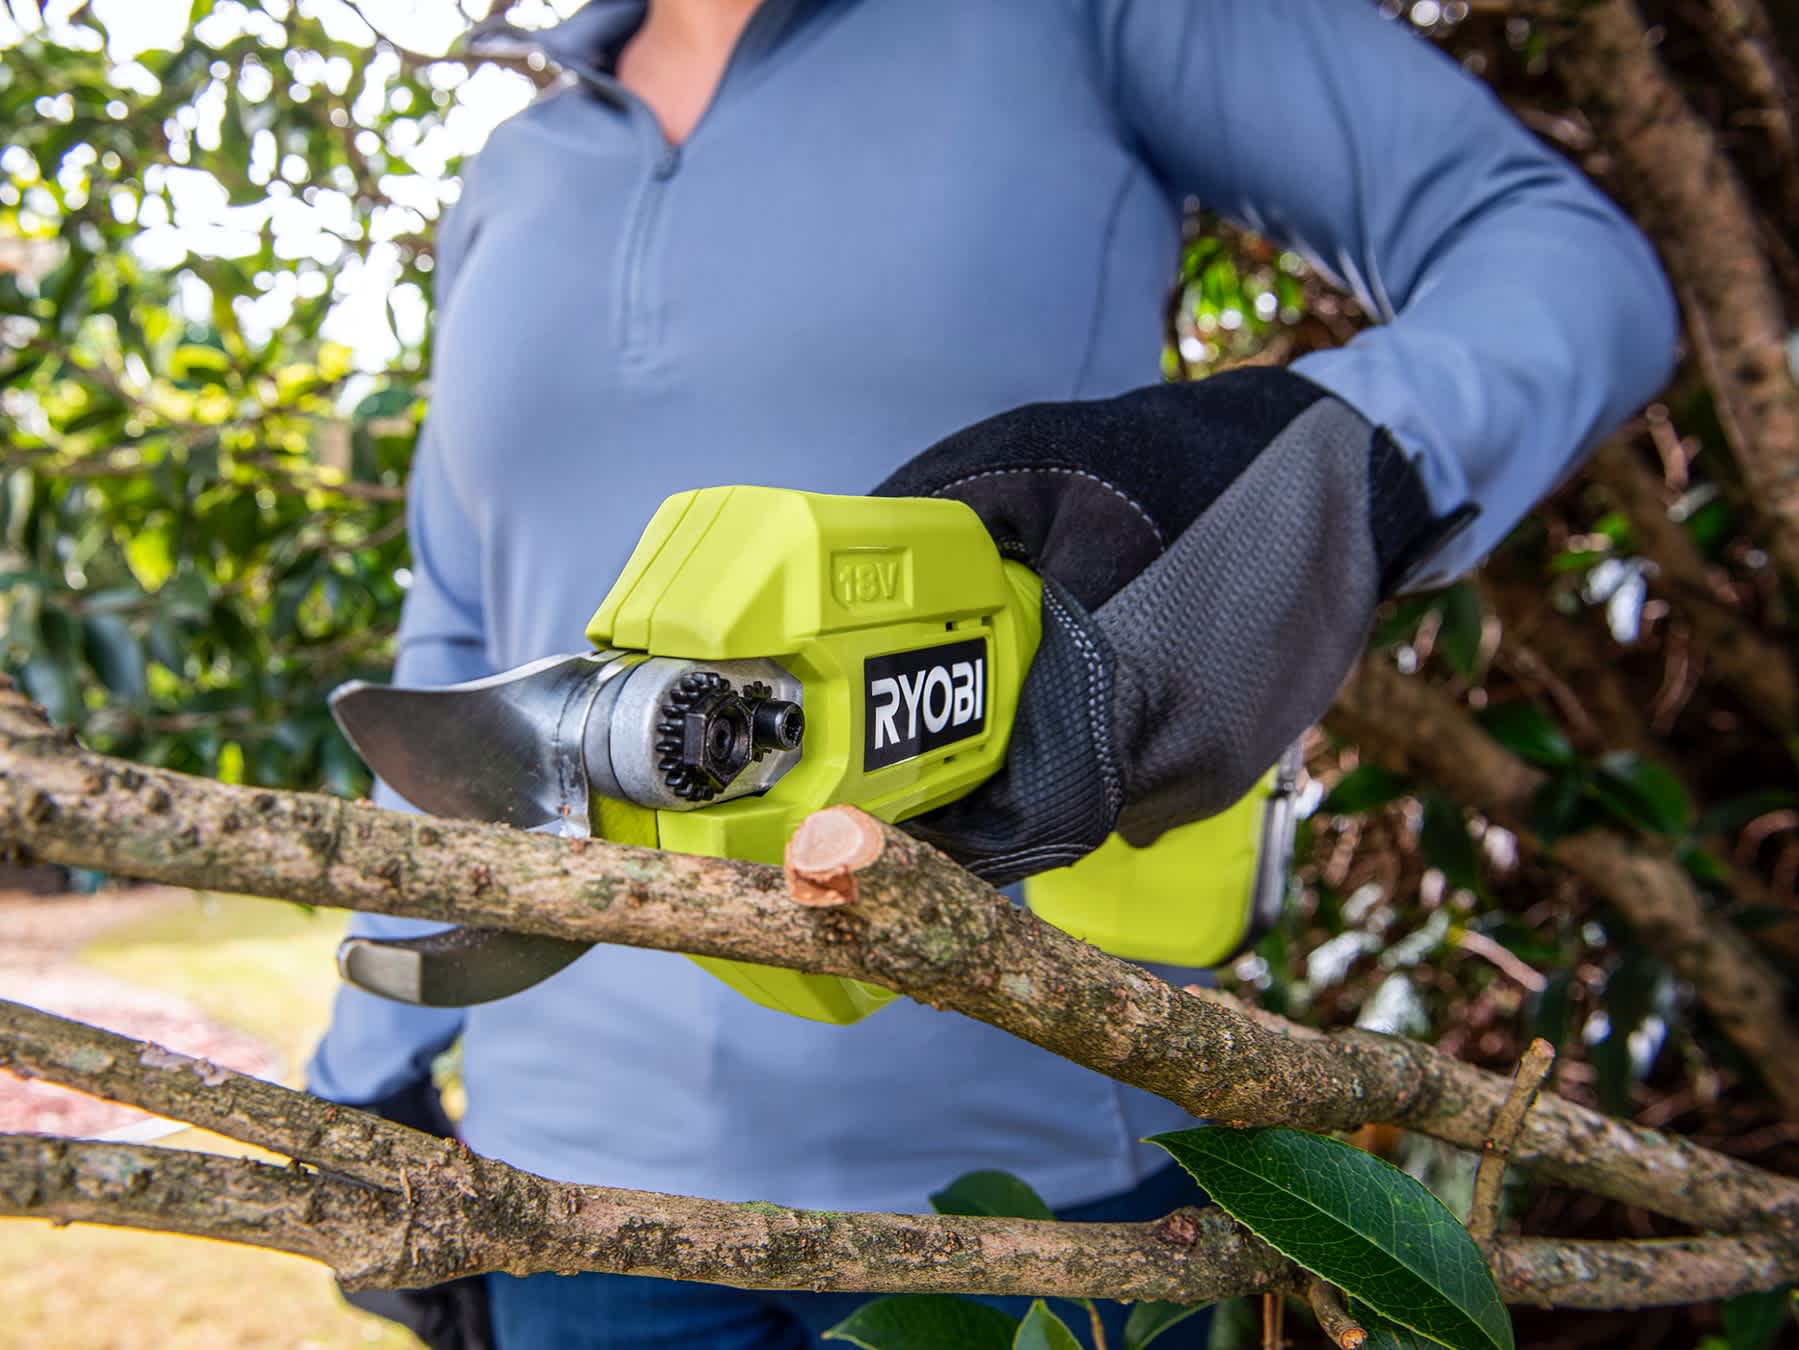 Product Features Image for 18V ONE+ Lithium-Ion Cordless Pruning Shear Kit with 2.0 Ah Battery and Charger.